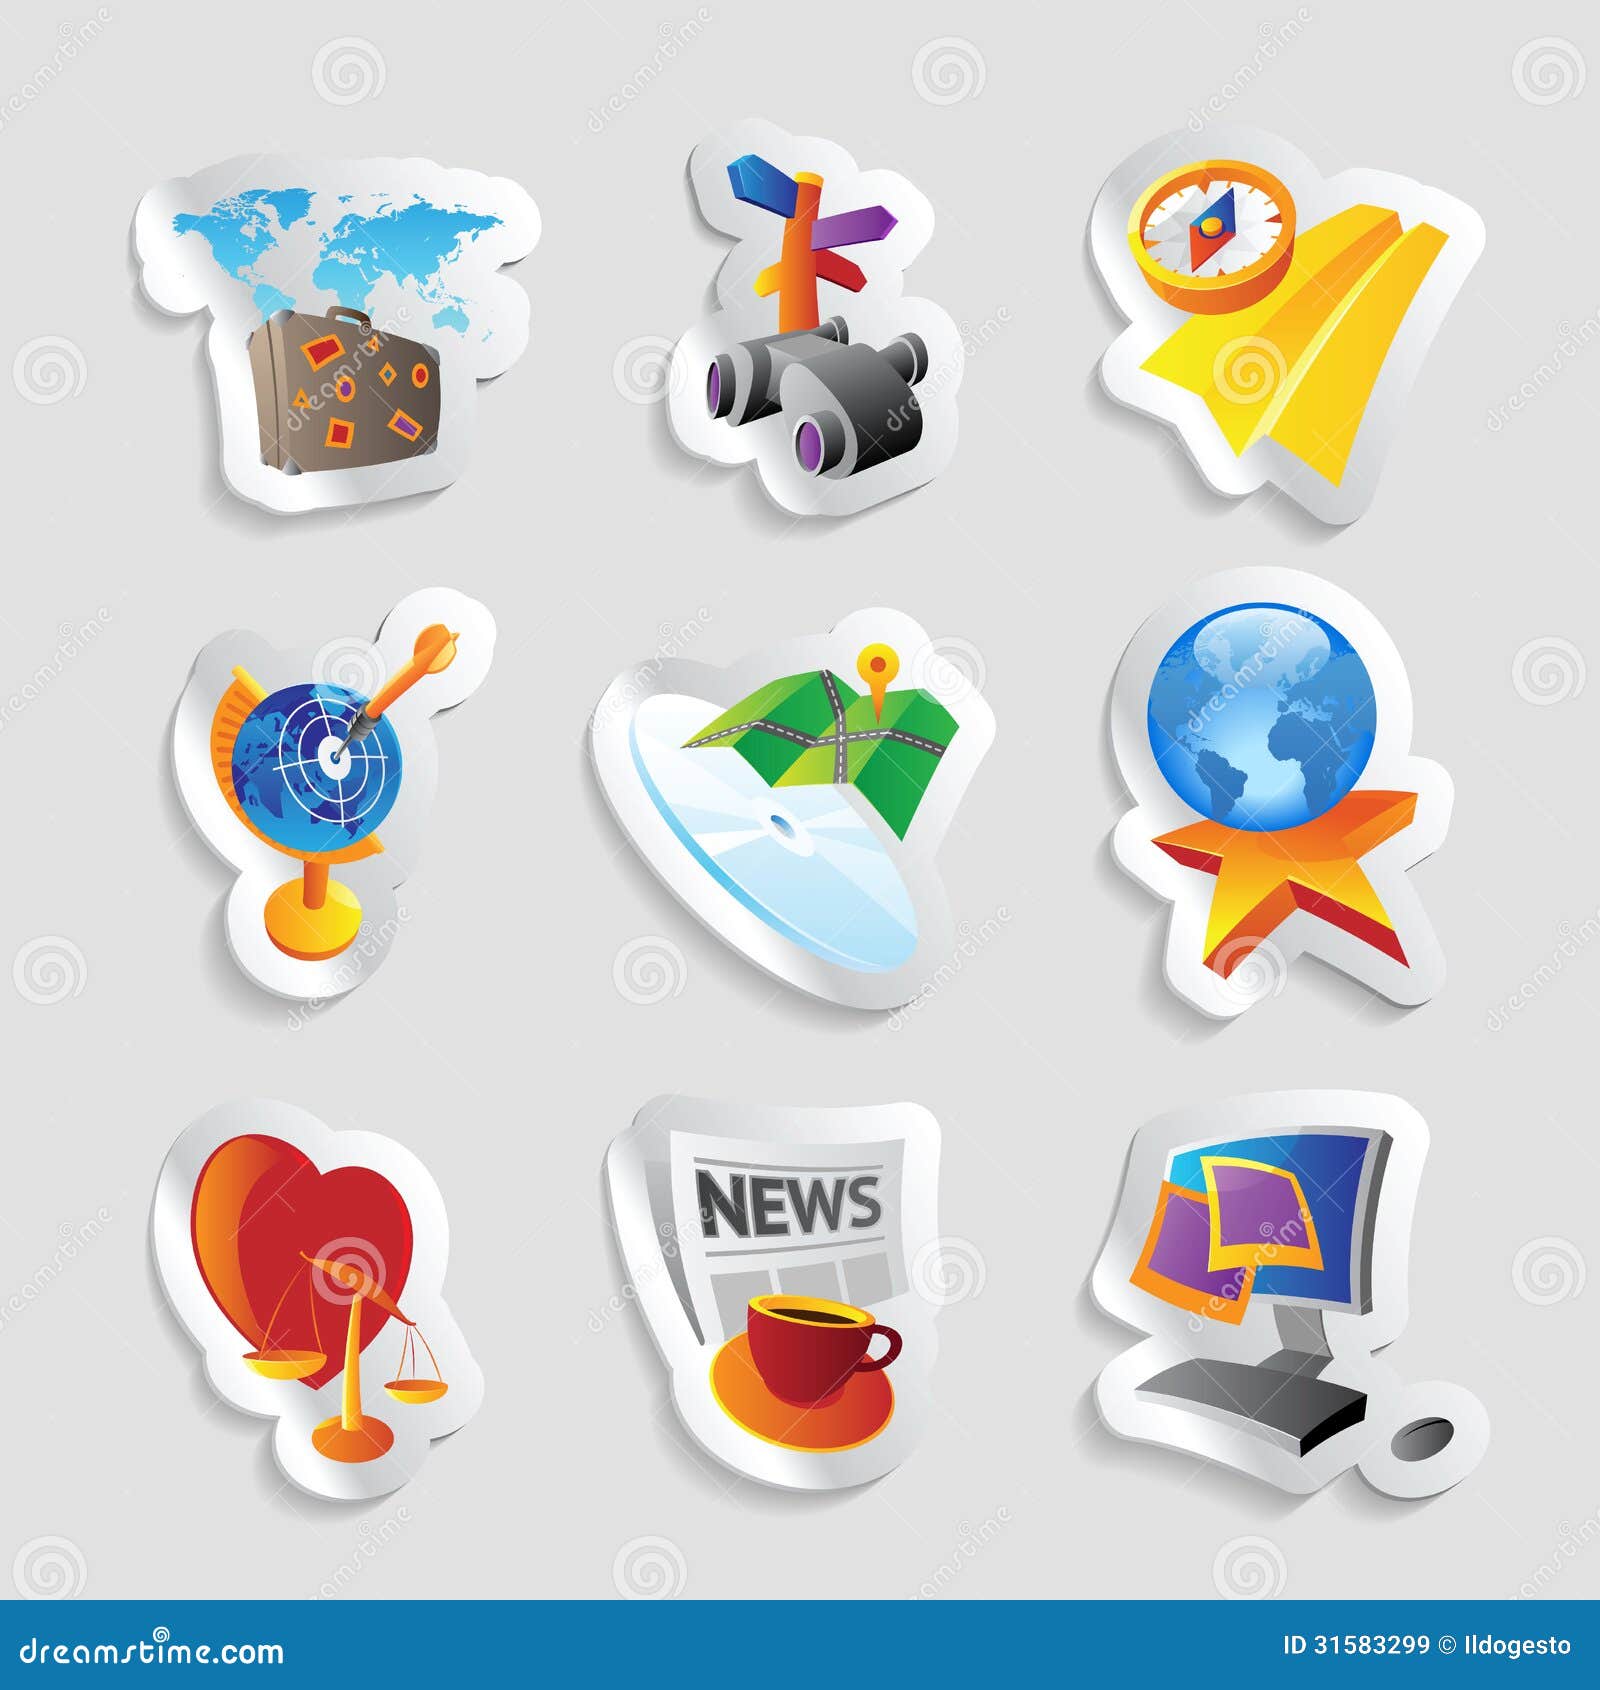 icons for leisure